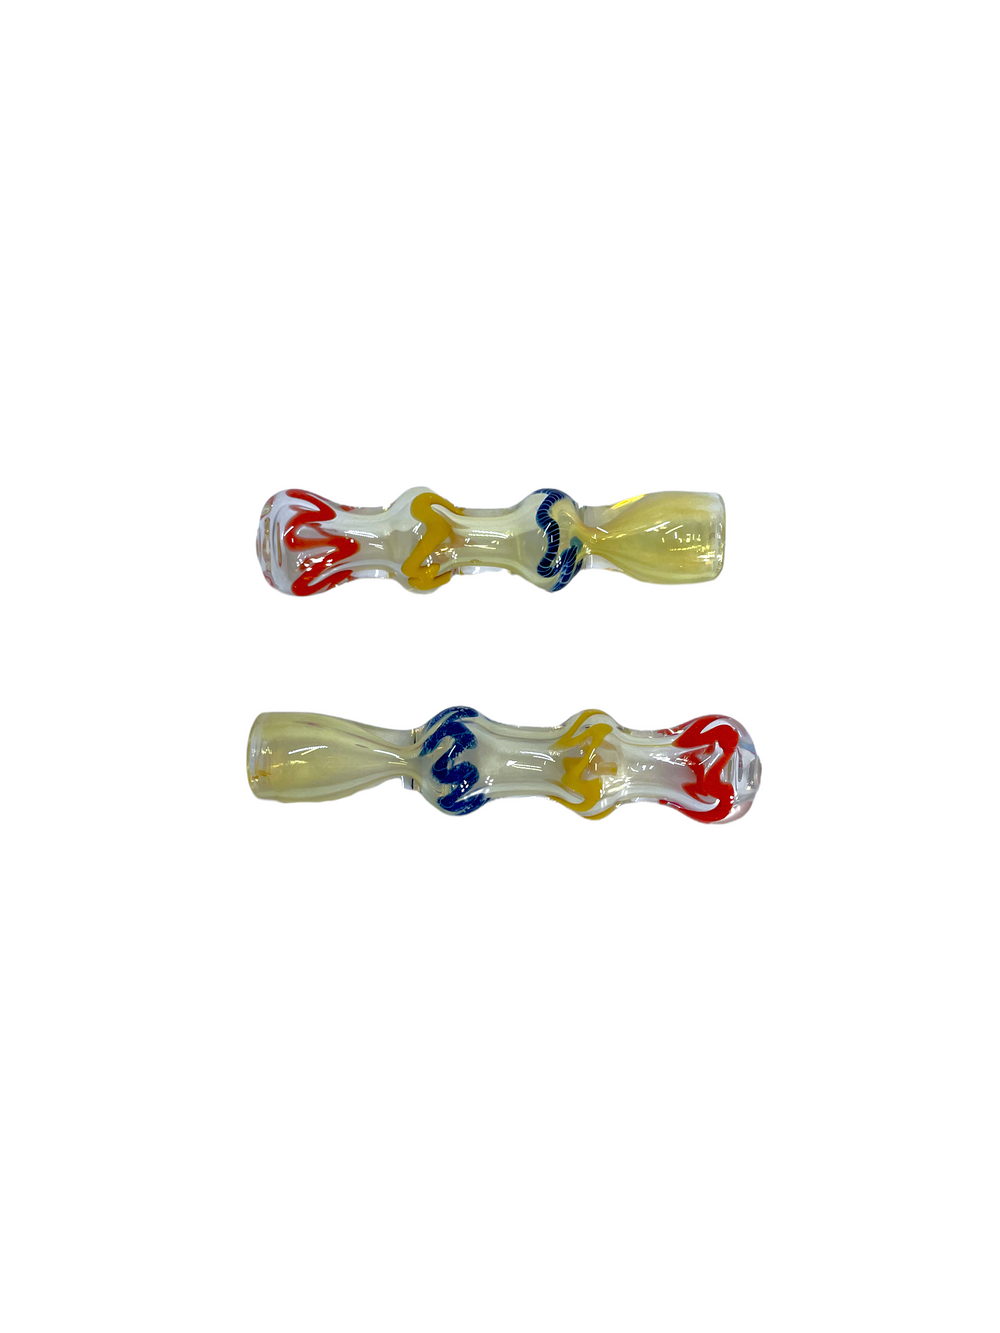 Twisted Color Chillum One Hitter